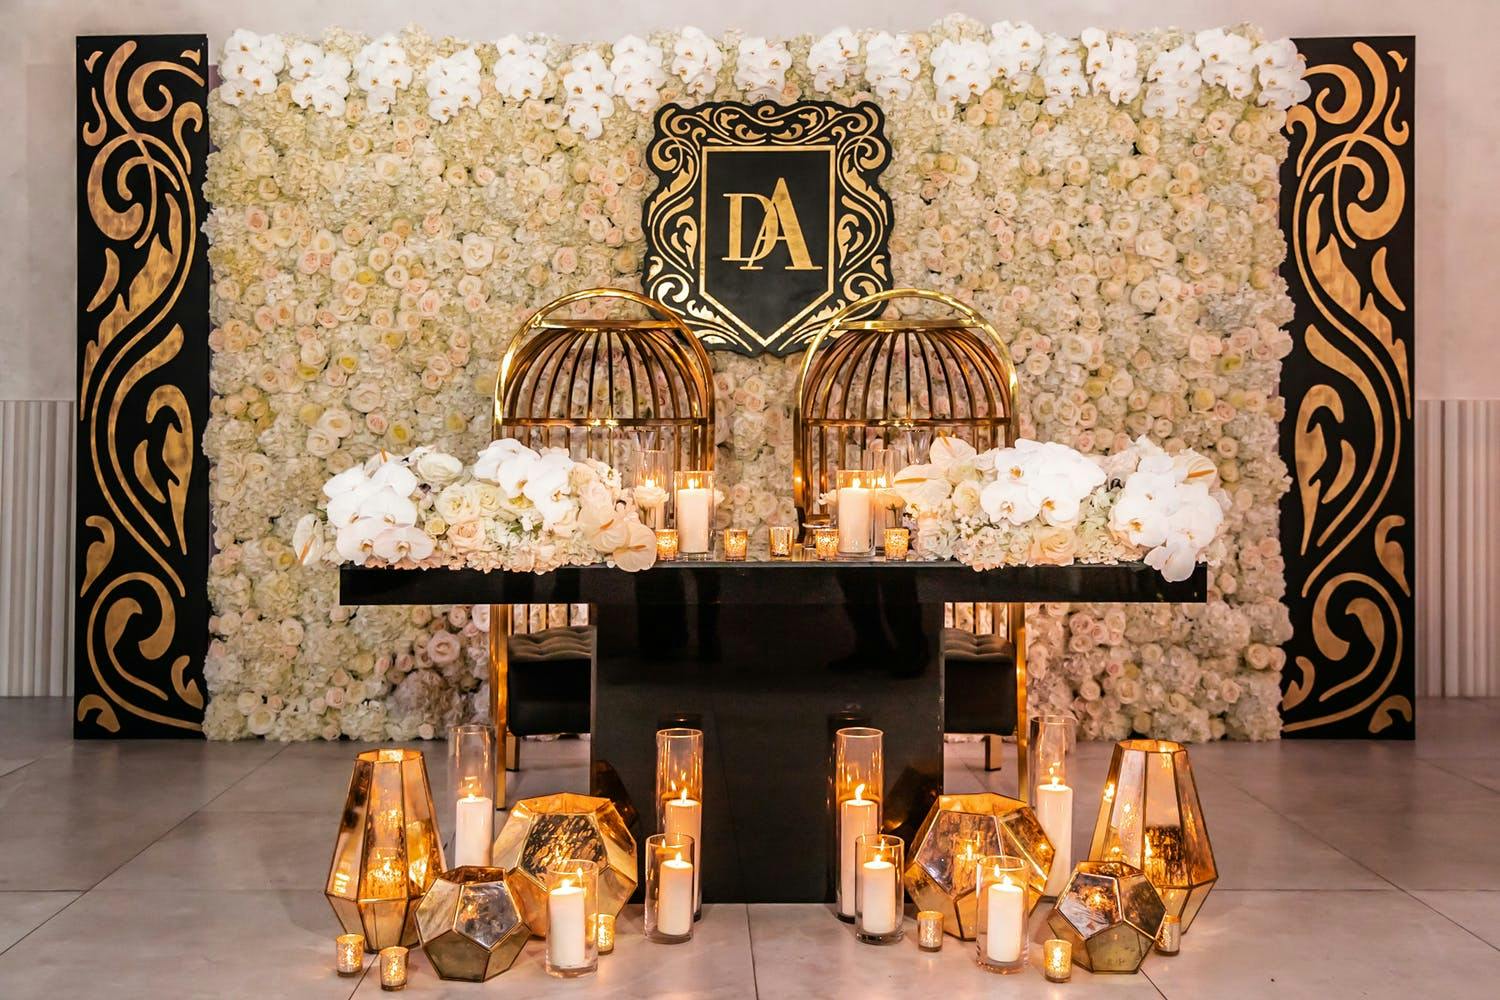 Art Deco-Style Sweetheart Table With Golden Lantern Décor at Foot of Table | PartySlate